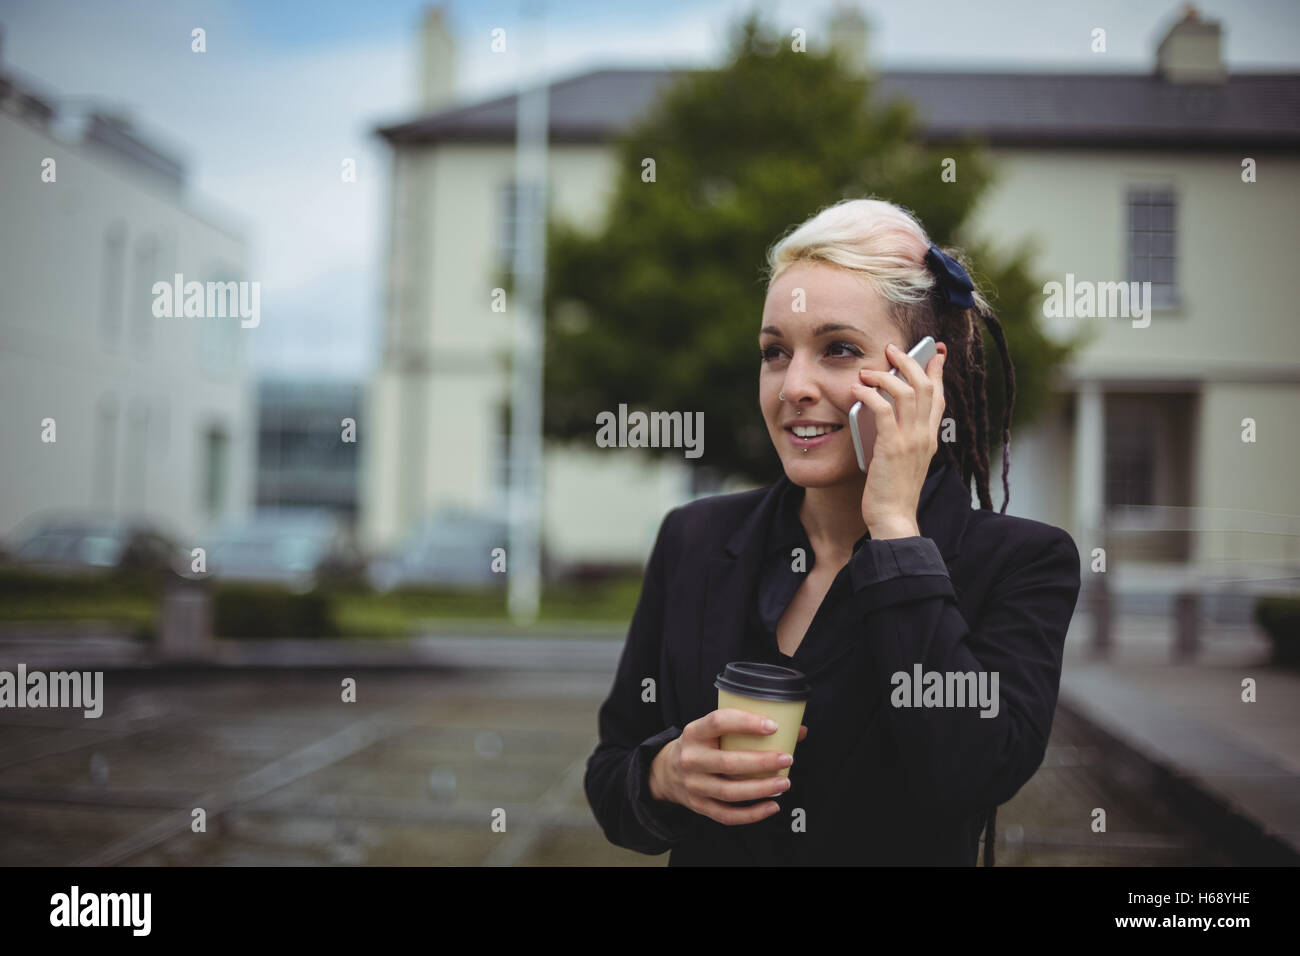 Businesswoman talking on mobile phone while holding disposable coffee cup Stock Photo